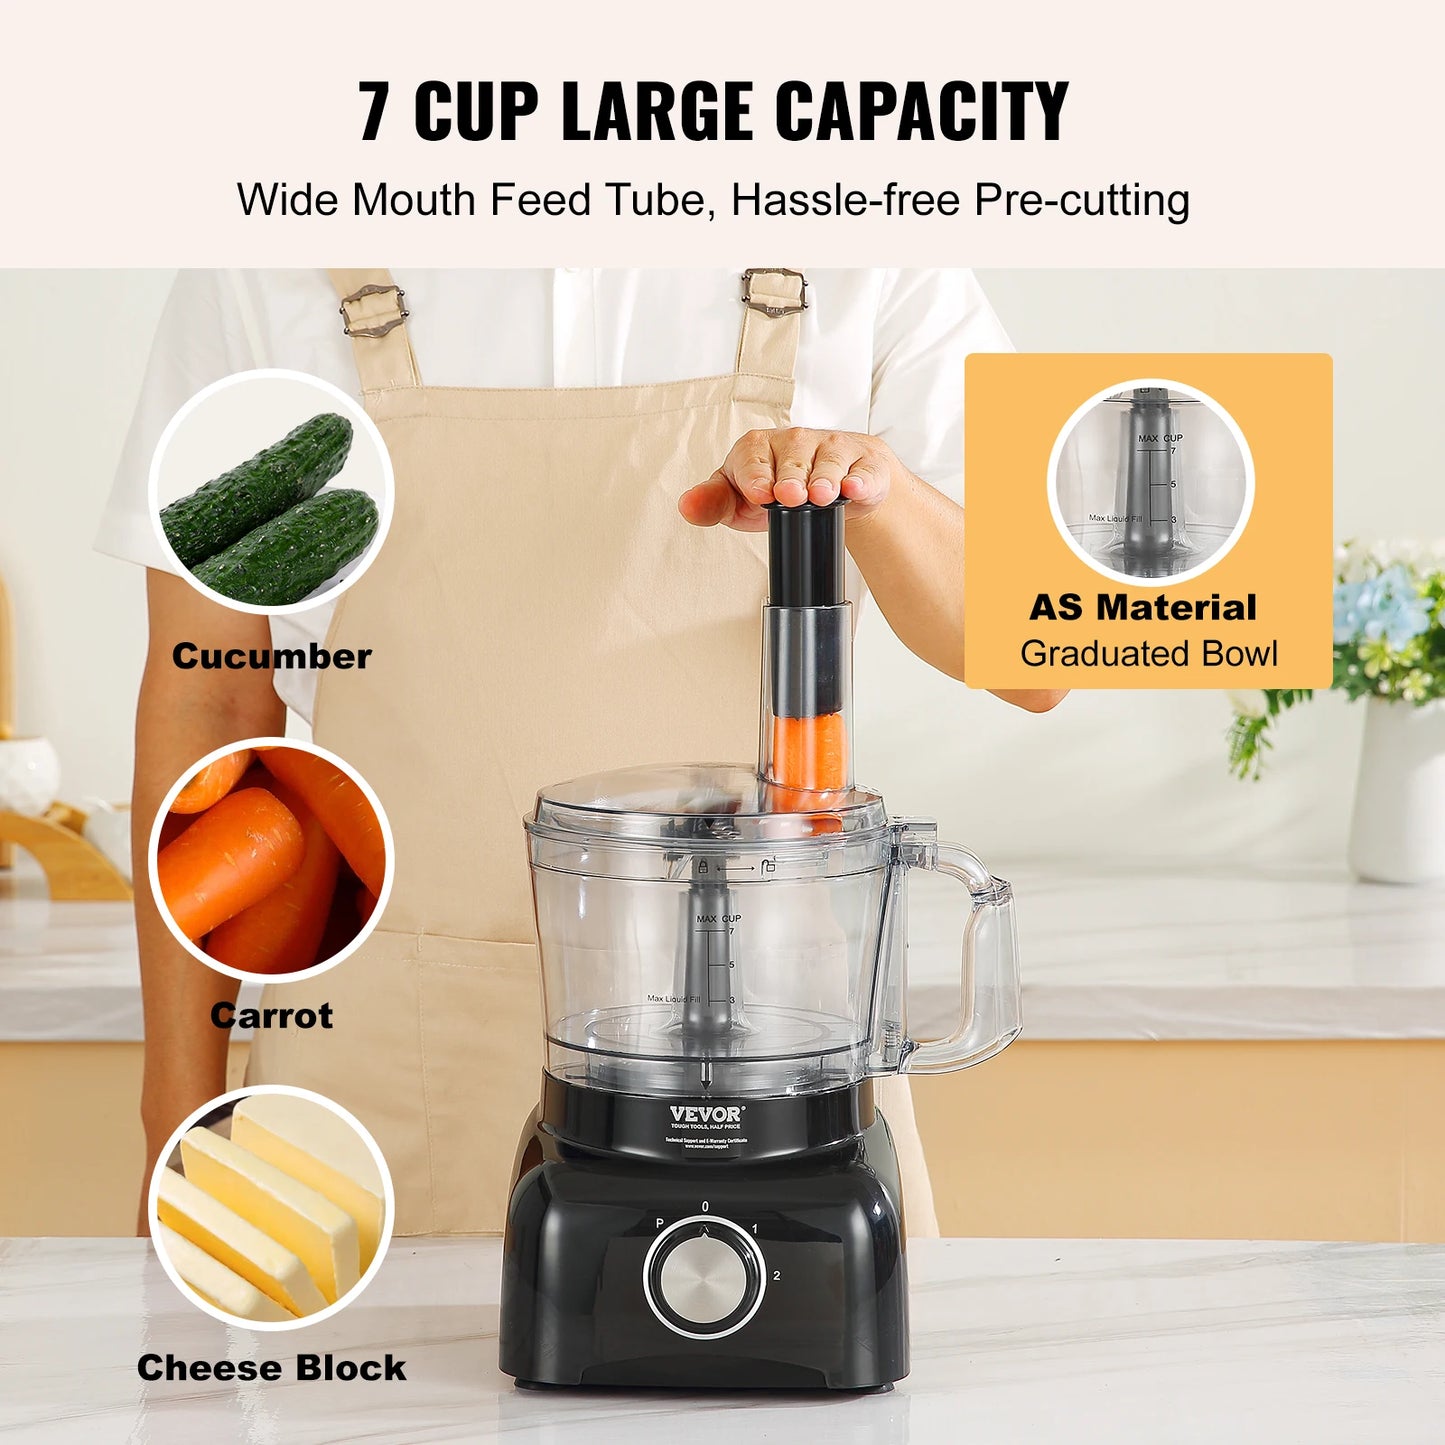 VEVOR Food Processor 7-Cup Vegetable Chopper for Chopping Slicing 350 Watts Stainless Steel Blade Professional Electric Food